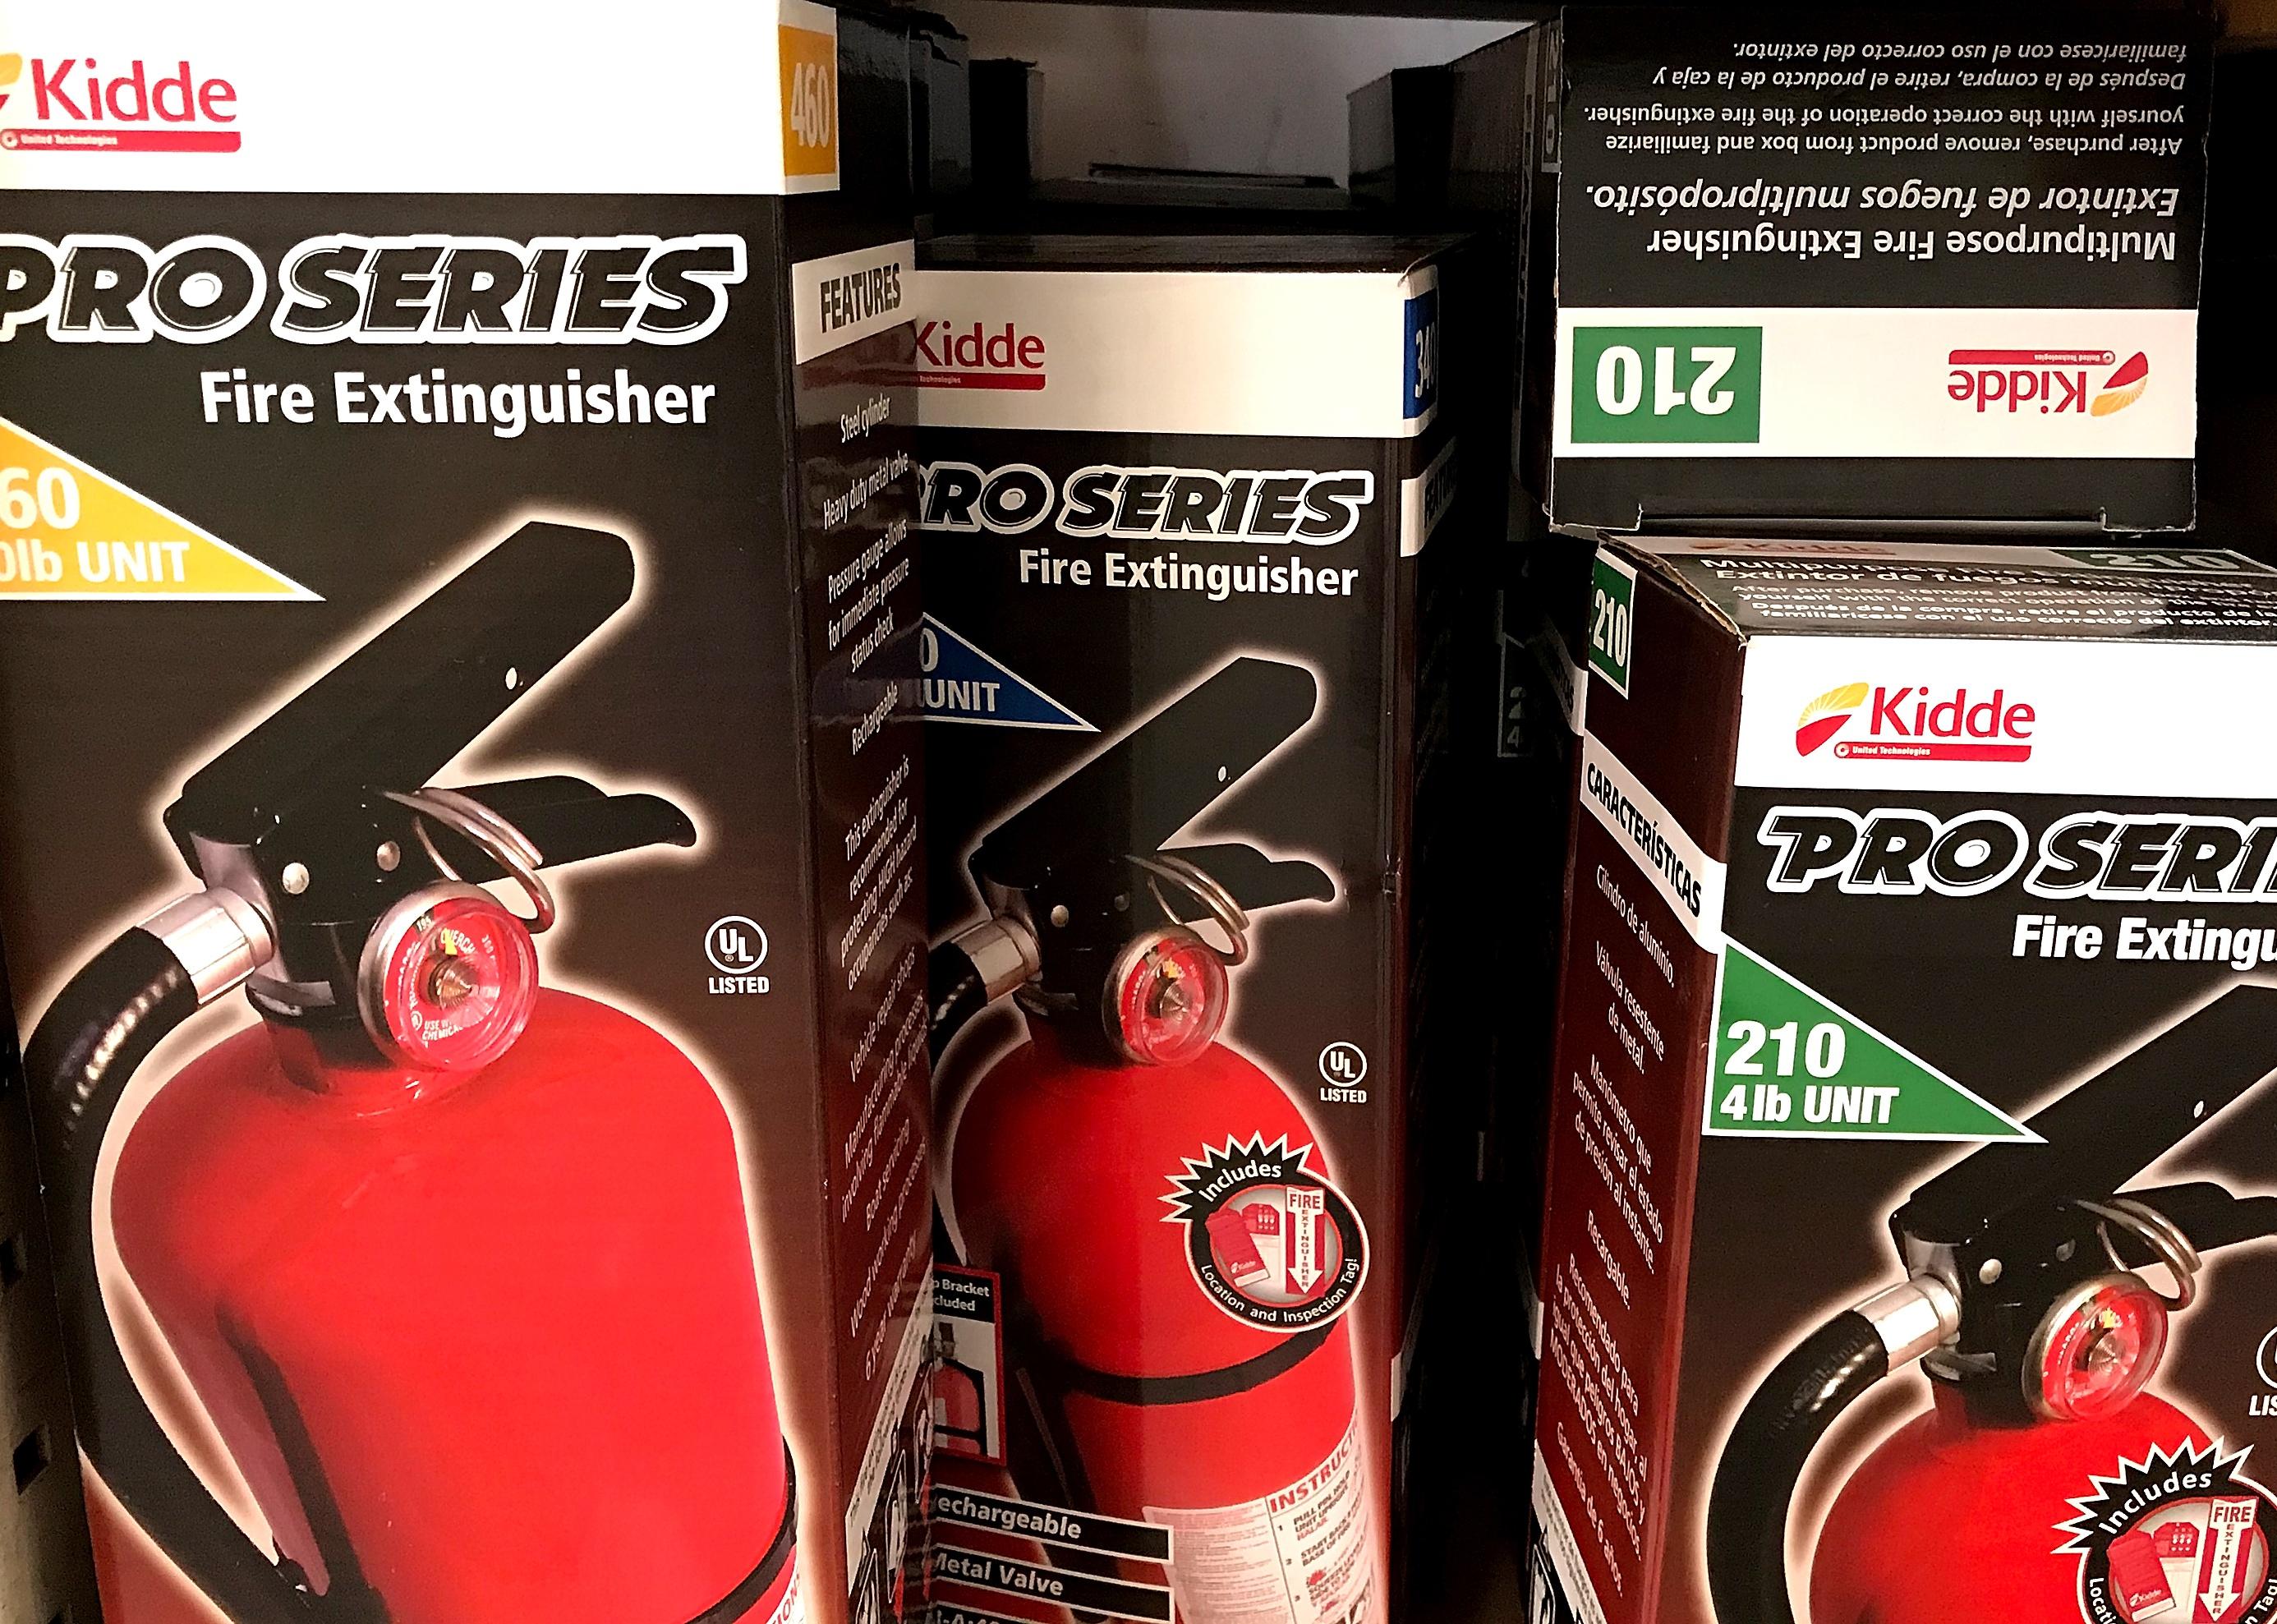 Several boxes of recalled Kidde fire extinguishers.